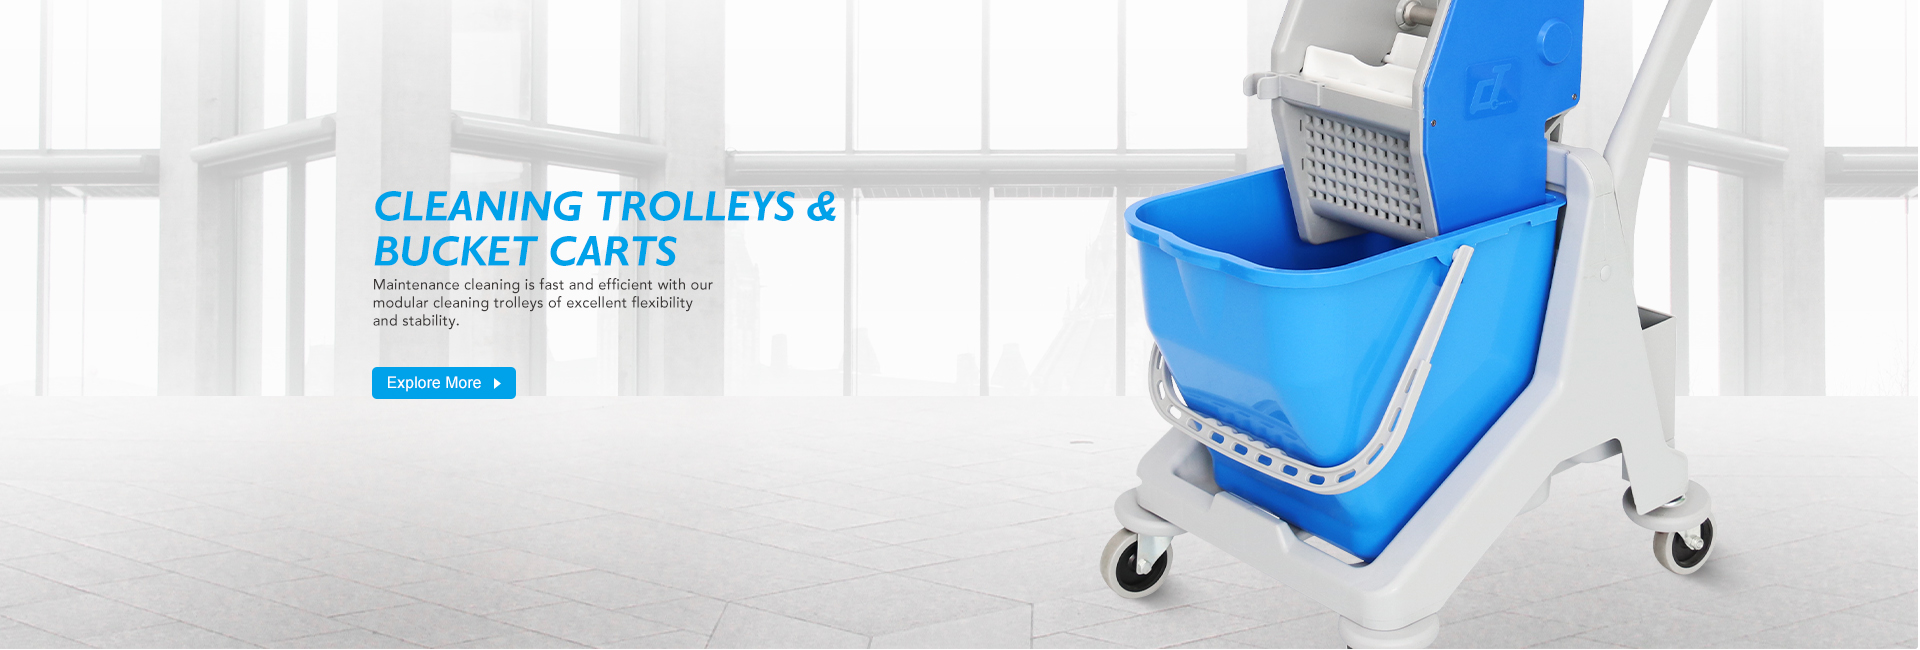 Cleaning Trolley & Bucket Cart